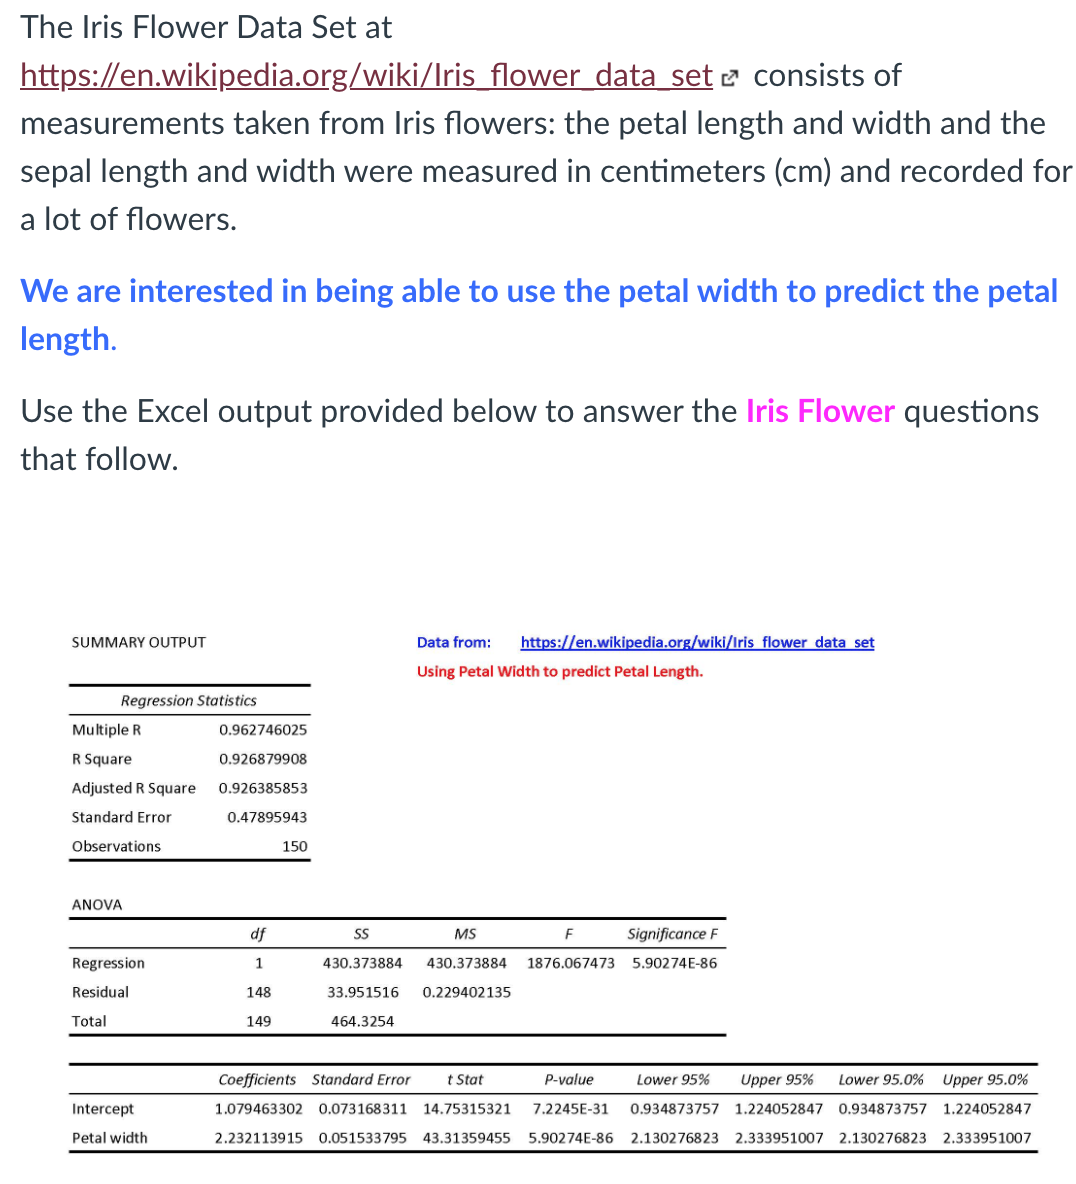 The Iris Flower Data Set at
https://en.wikipedia.org/wiki/Iris flower data set e consists of
measurements taken from Iris flowers: the petal length and width and the
sepal length and width were measured in centimeters (cm) and recorded for
a lot of flowers.
We are interested in being able to use the petal width to predict the petal
length.
Use the Excel output provided below to answer the Iris Flower questions
that follow.
SUMMARY OUTPUT
Data from:
https://en.wikipedia.org/wiki/Iris flower data set
Using Petal Width to predict Petal Length.
Regression Statistics
Multiple R
0.962746025
R Square
0.926879908
Adjusted R Square
0.926385853
Standard Error
0.47895943
Observations
150
ANOVA
df
MS
Significance F
Regression
1
430.373884
430.373884
1876.067473 5.90274E-86
Residual
148
33.951516
0.229402135
Total
149
464.3254
Coefficients Standard Error
t Stat
P-value
Lower 95%
Upper 95%
Lower 95.0% Upper 95.0%
Intercept
1.079463302 0.073168311
14.75315321
7.2245E-31
0.934873757 1.224052847 0.934873757 1.224052847
Petal width
2.232113915
0.051533795
43.31359455
5.90274E-86 2.130276823 2.333951007 2.130276823 2.333951007
